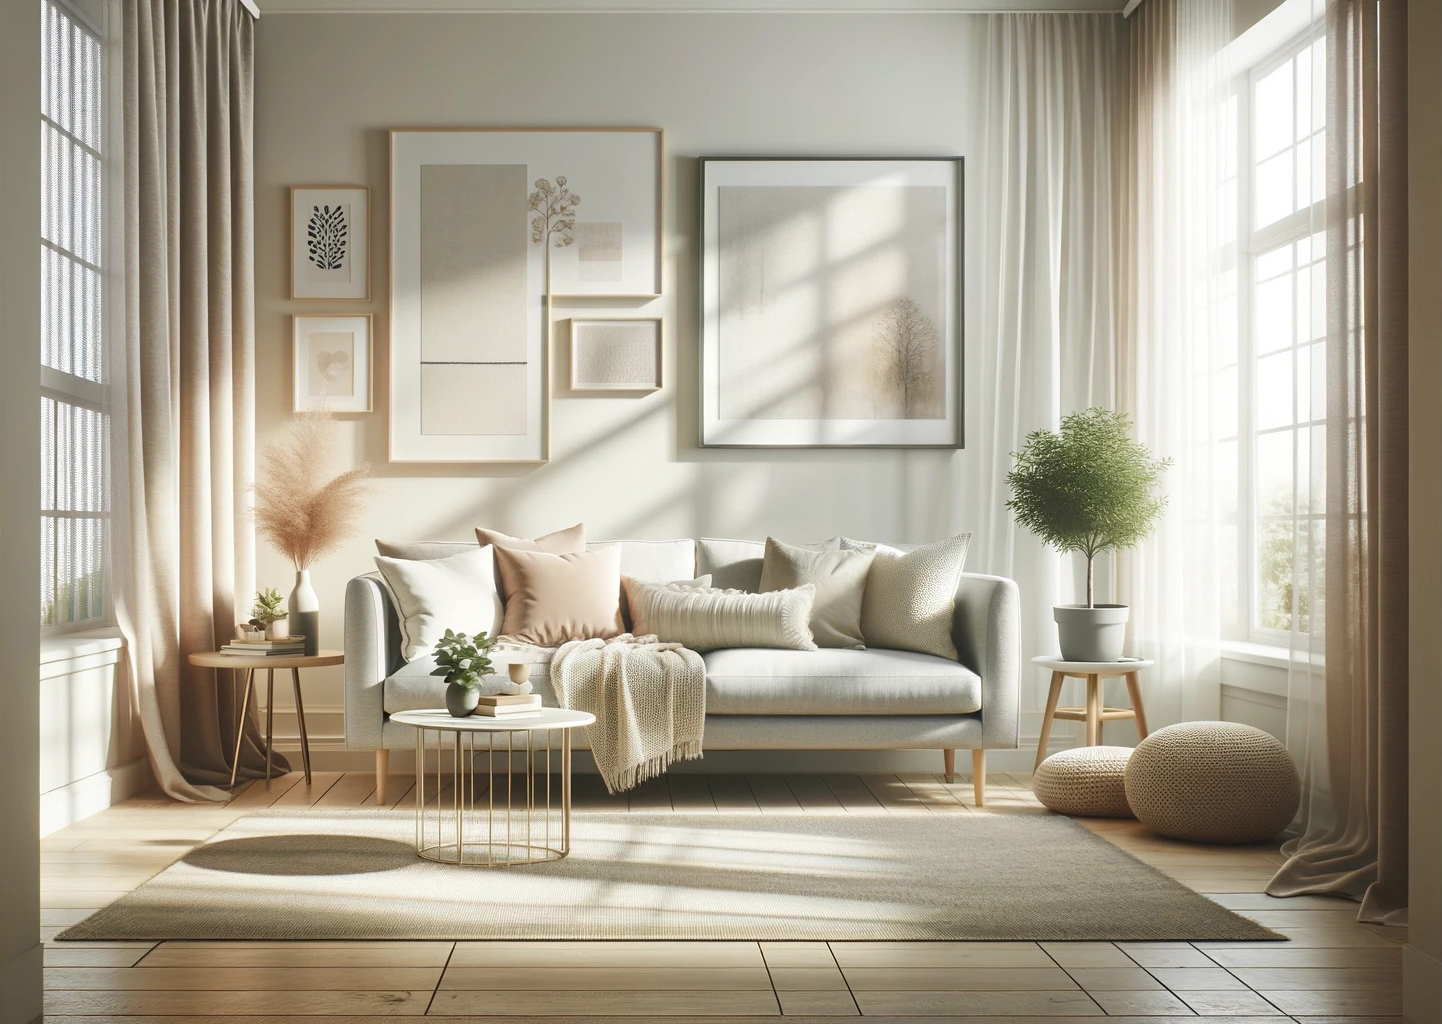 Stylish and serene Scandinavian-style living room with soft natural light, featuring a minimalist sofa, plush rug, and decorative wall art, ideal for a modern home decoration blog.